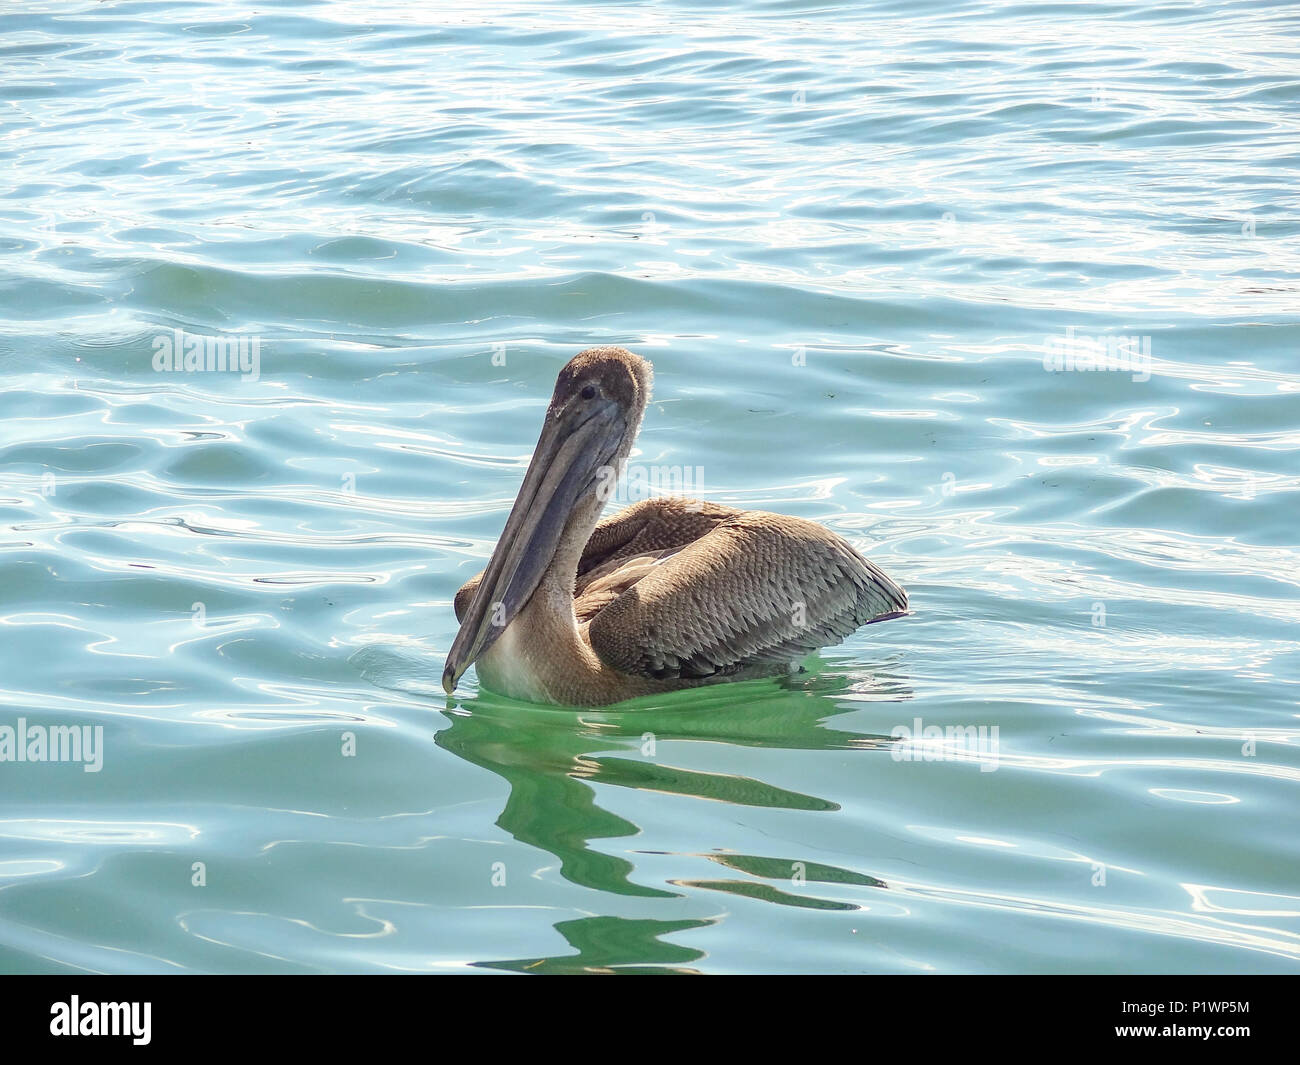 sunny water scenery including a swimming pelican seen in Belize in Central America Stock Photo